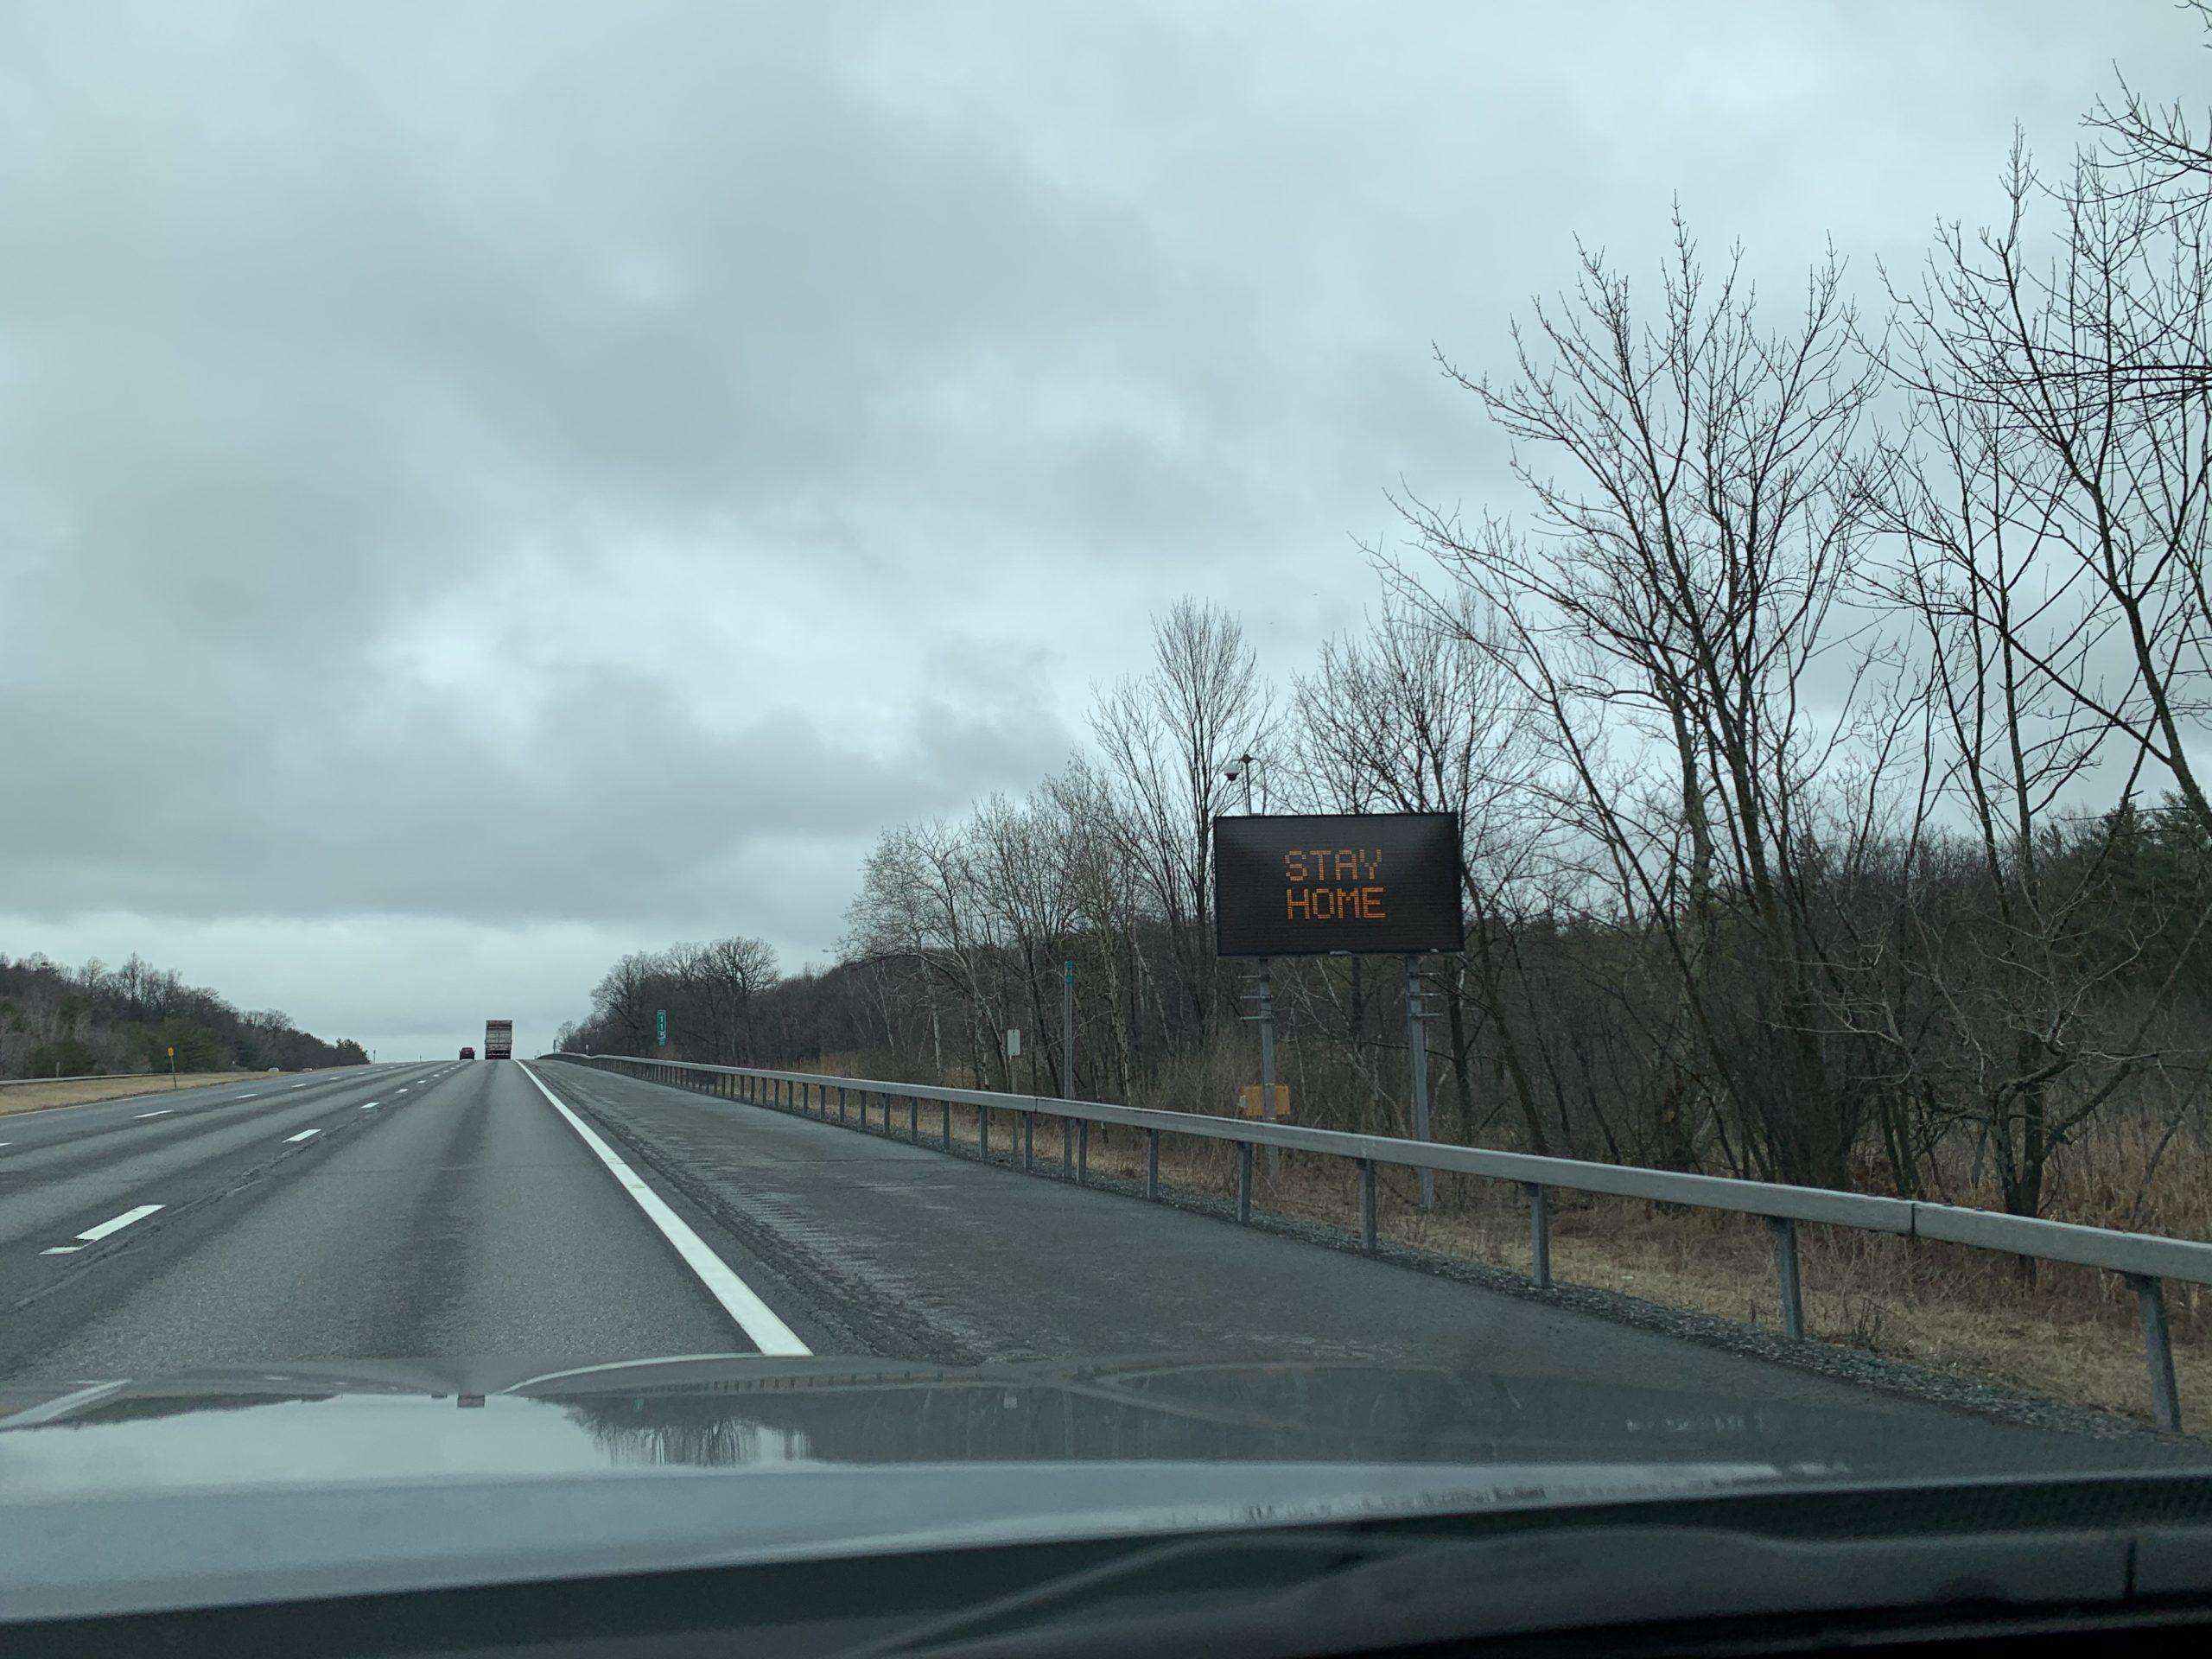 "Stay Home" sign displayed on the roadside